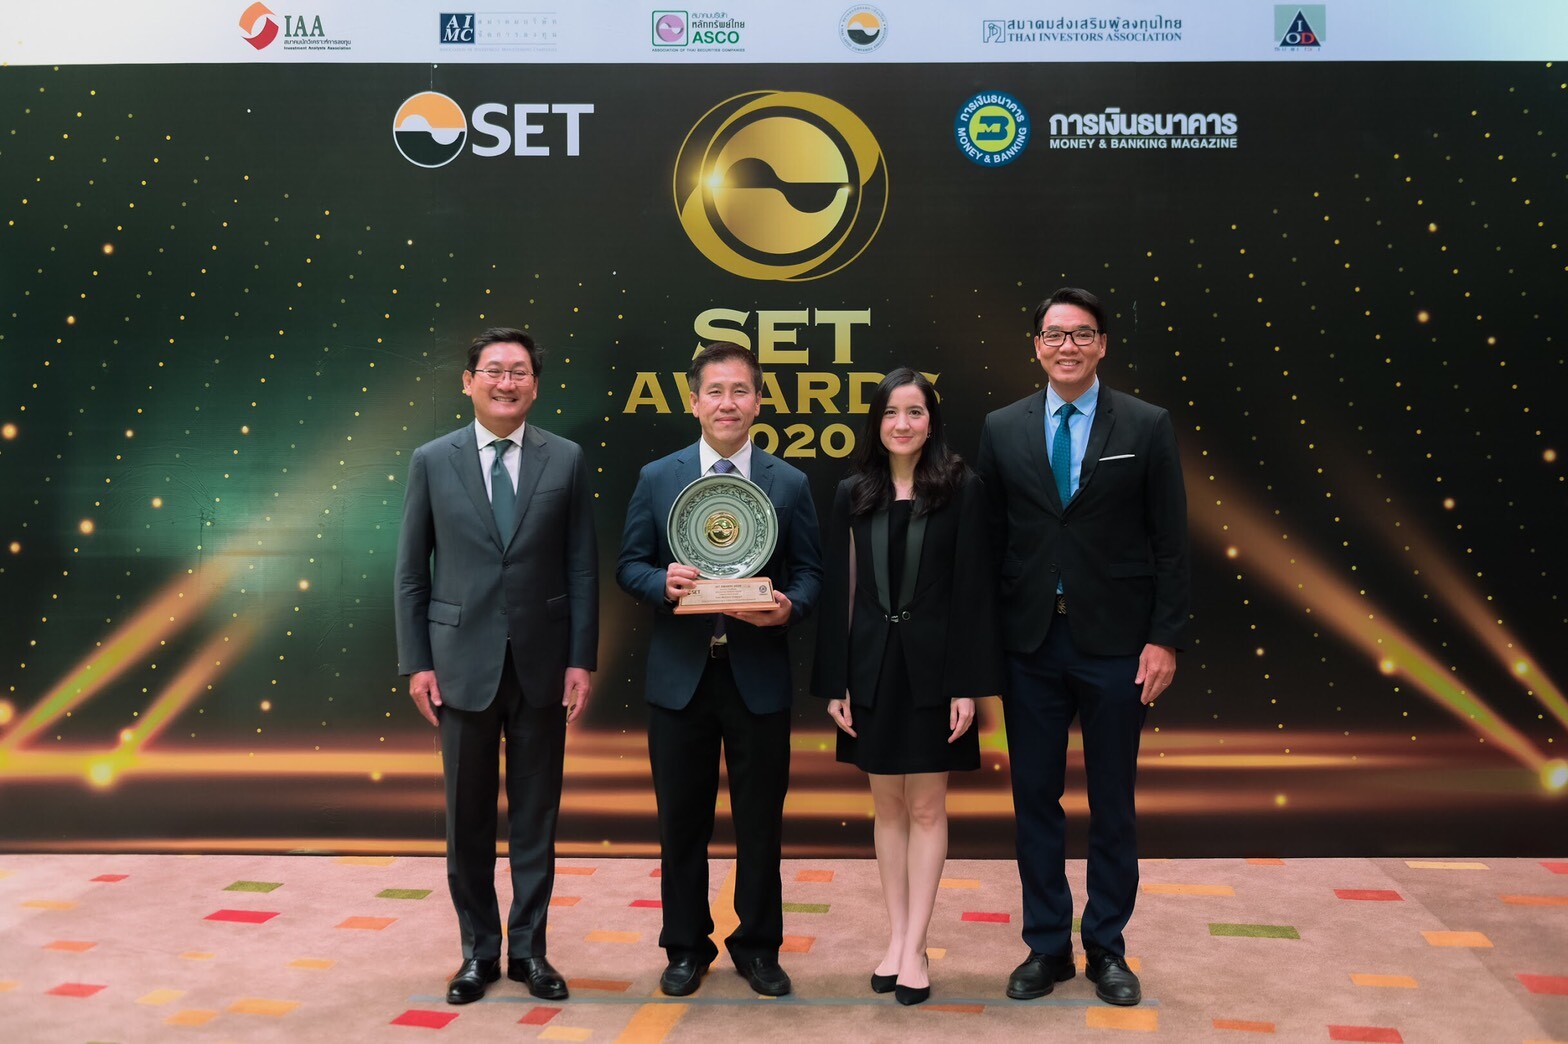 SPA คว้ารางวัล Best Investor Relations Awards for listed Company in mai ในงาน SET Awards 2020